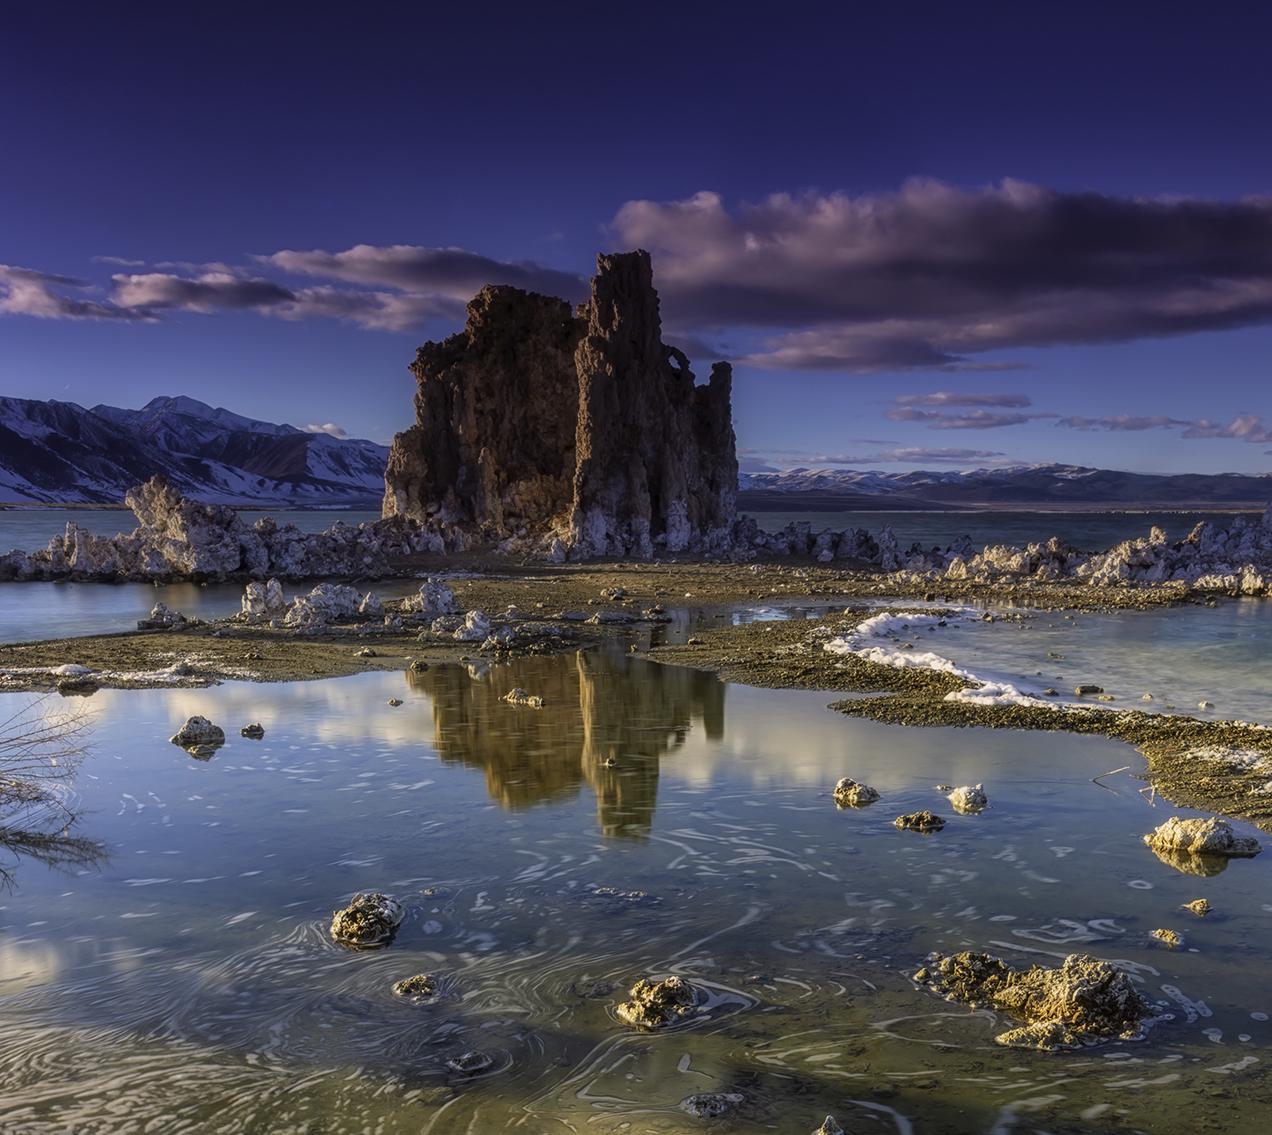 Title:    South Tufa Swirls
    Location: Mono Lake, California
    Edition: 2 of 5, signed by artist
    Description: The shoreline of the lake is never the same... The wind-whipped water forms swirling pools, deposits layers of fluffy froth on the